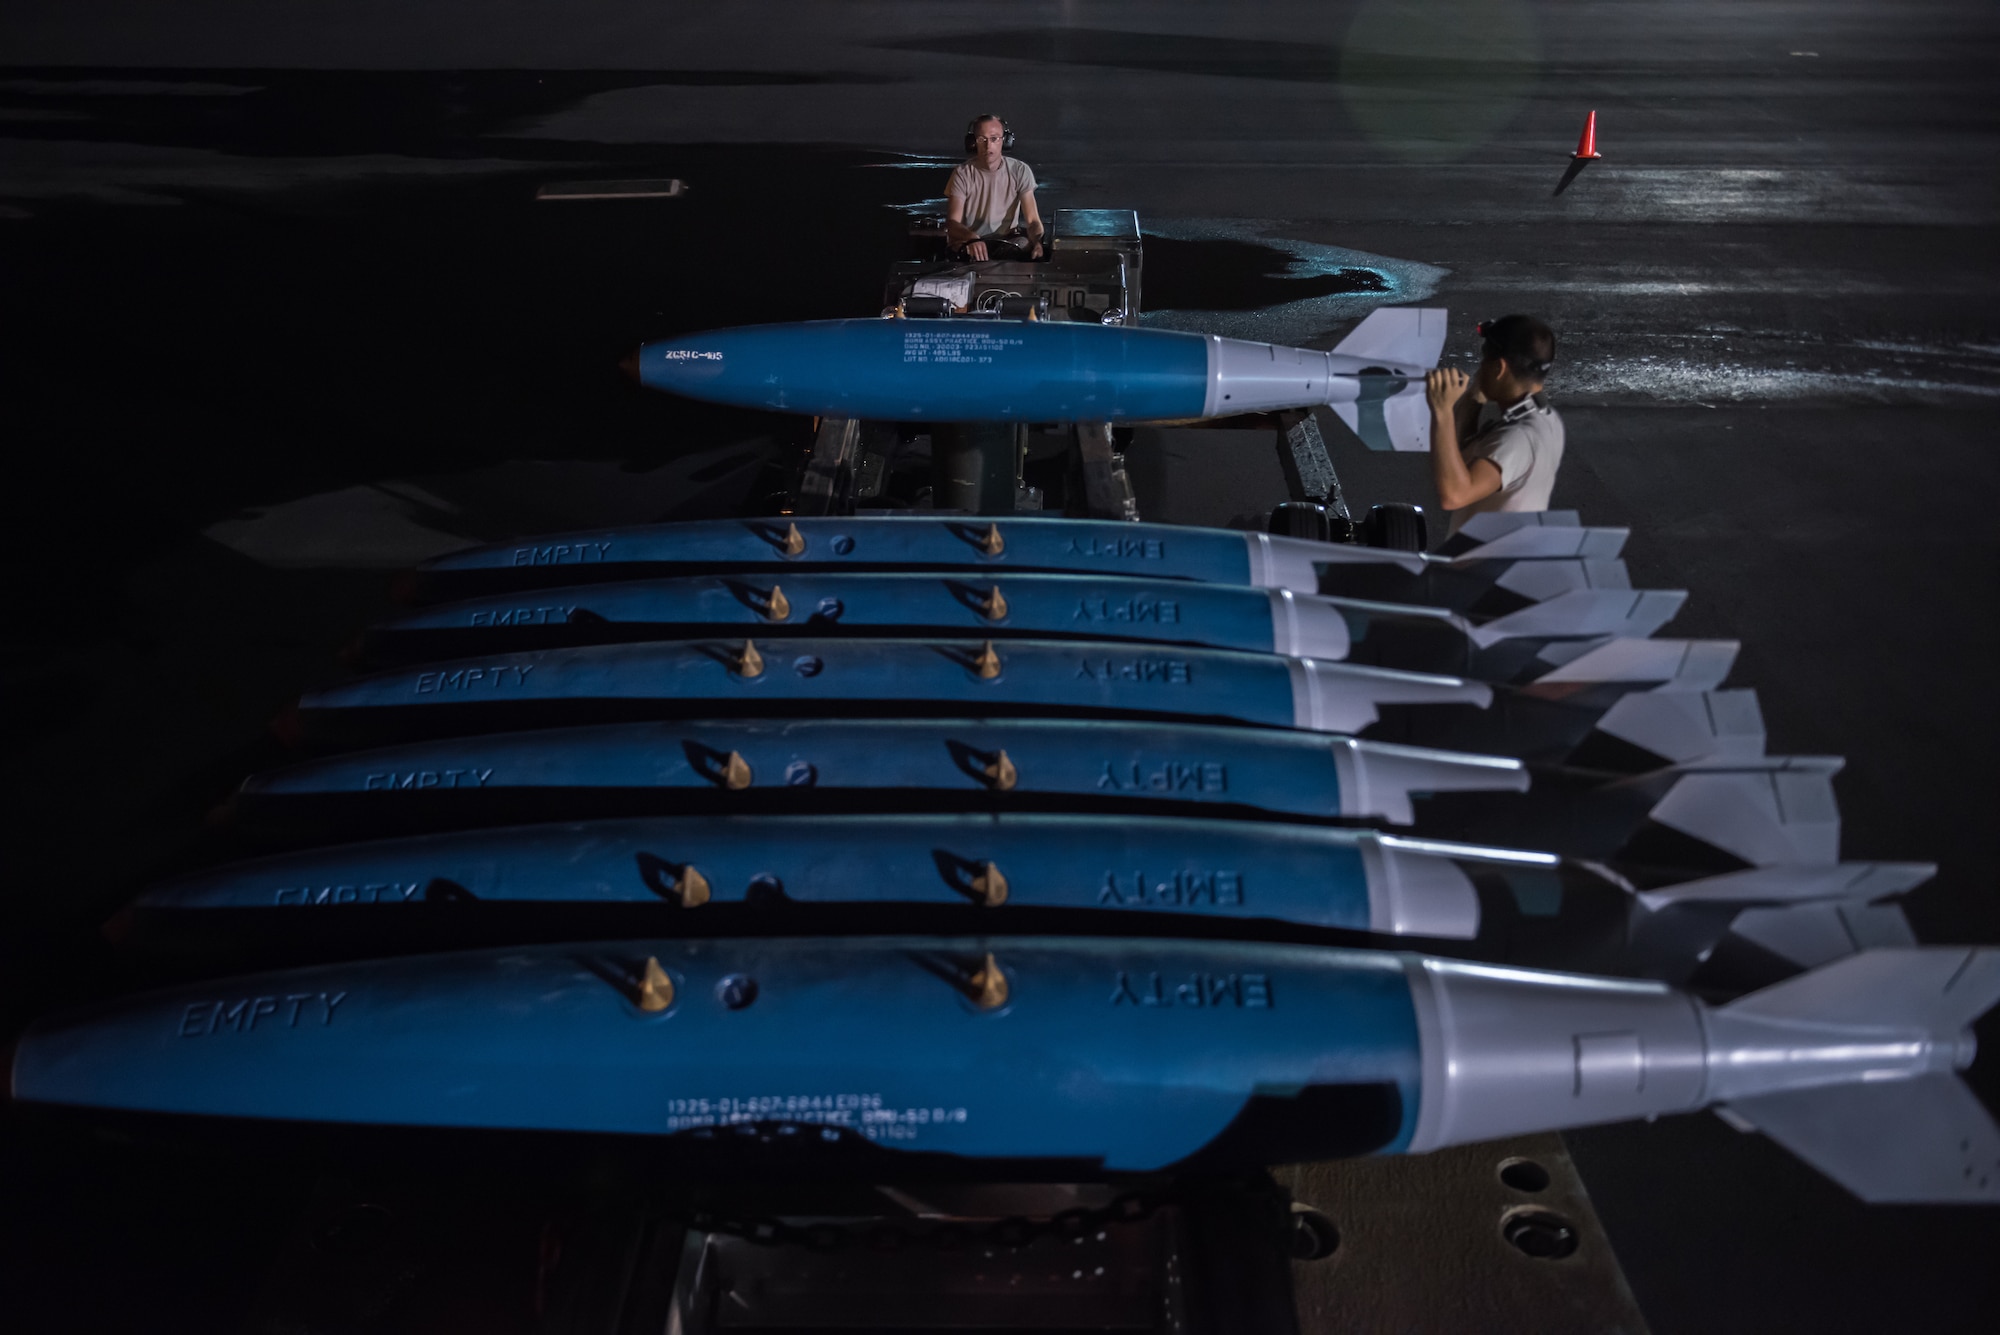 Senior Airman Michael C. Goodell, 509th Munitions Squadron weapons maintenance, prepares a B-2 Spirit bomber, deployed from Whiteman Air Force Base, Missouri, for a training mission at Joint Base Pearl Harbor-Hickam, Hawaii, Jan. 17, 2019.